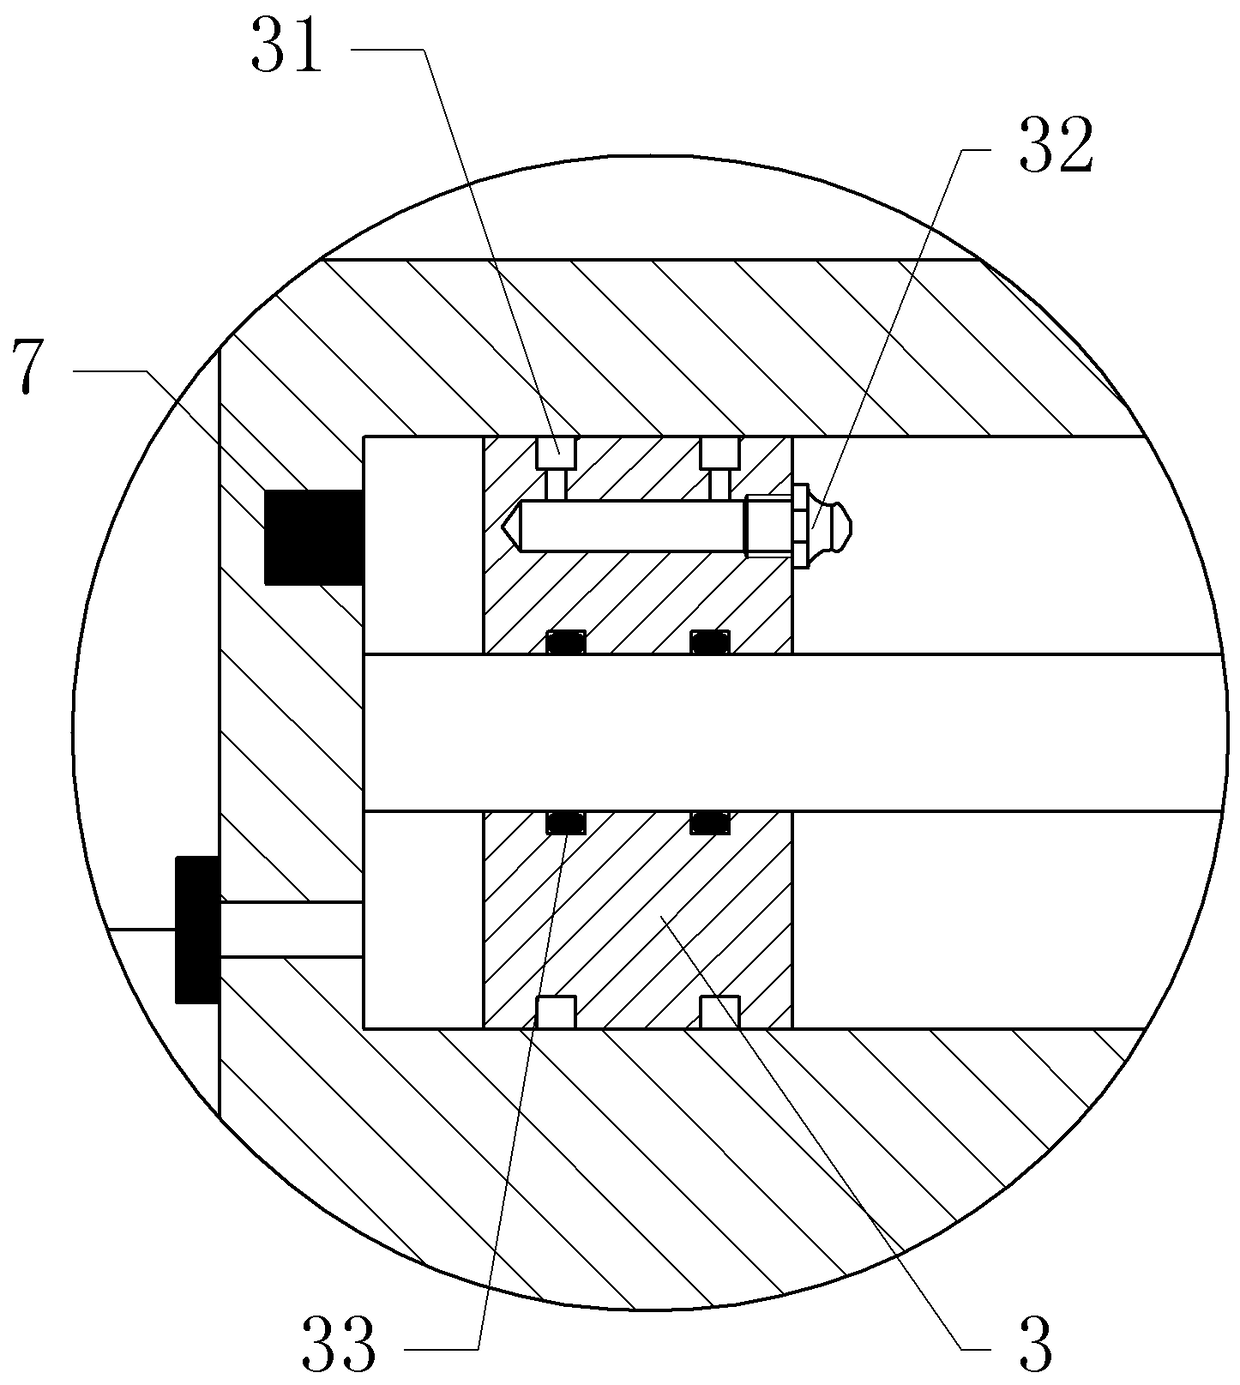 Defect detection method of high-pressure gas-filled connecting pipe